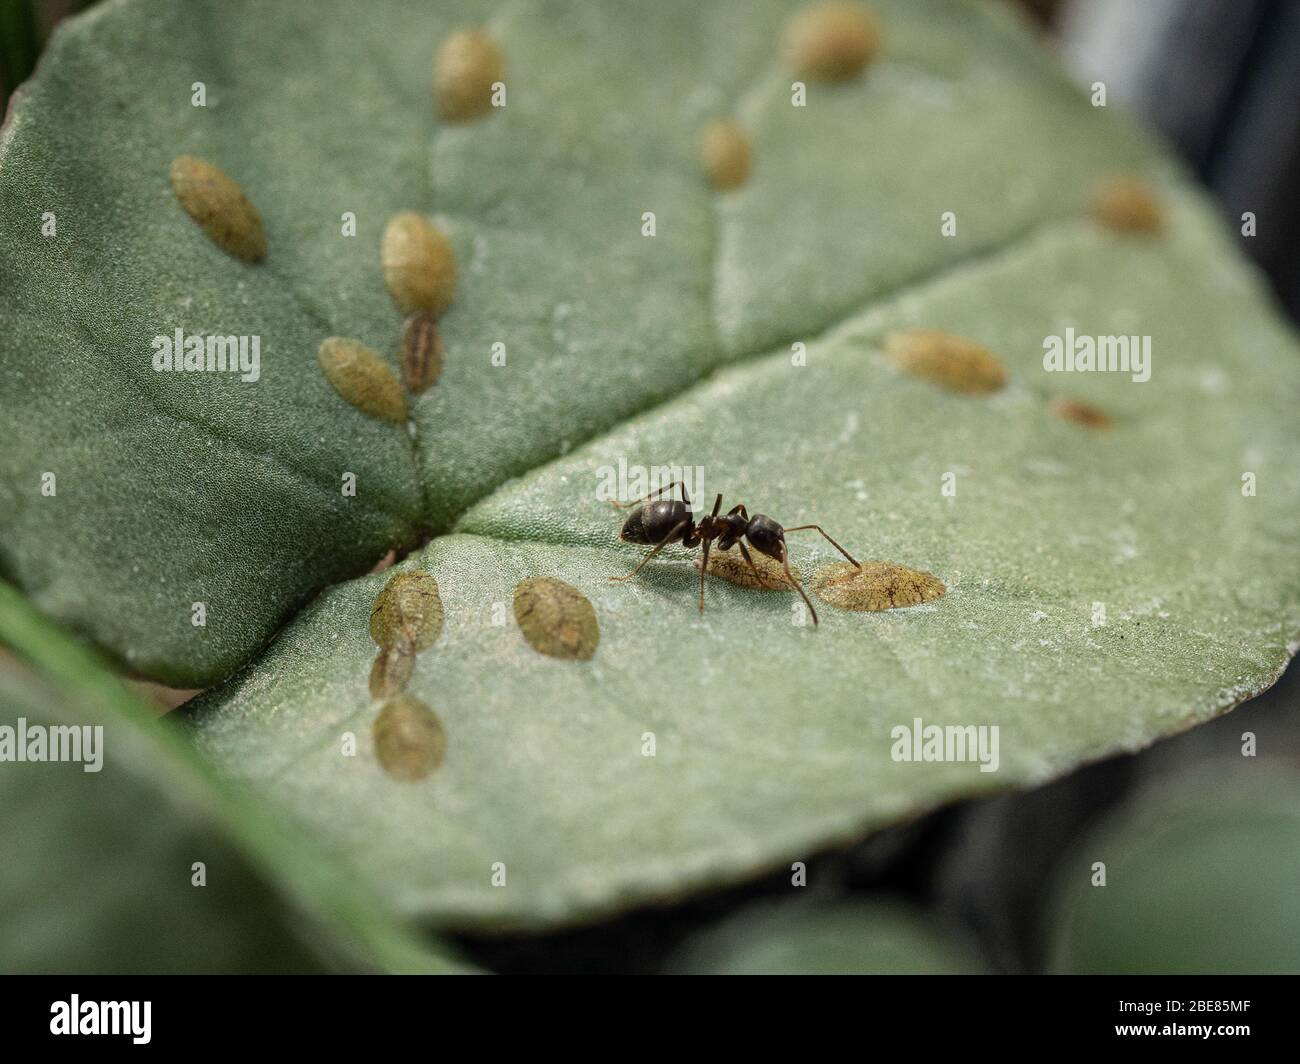 A close up of an ant milking a scale insect on a cyclamen leaf Stock Photo